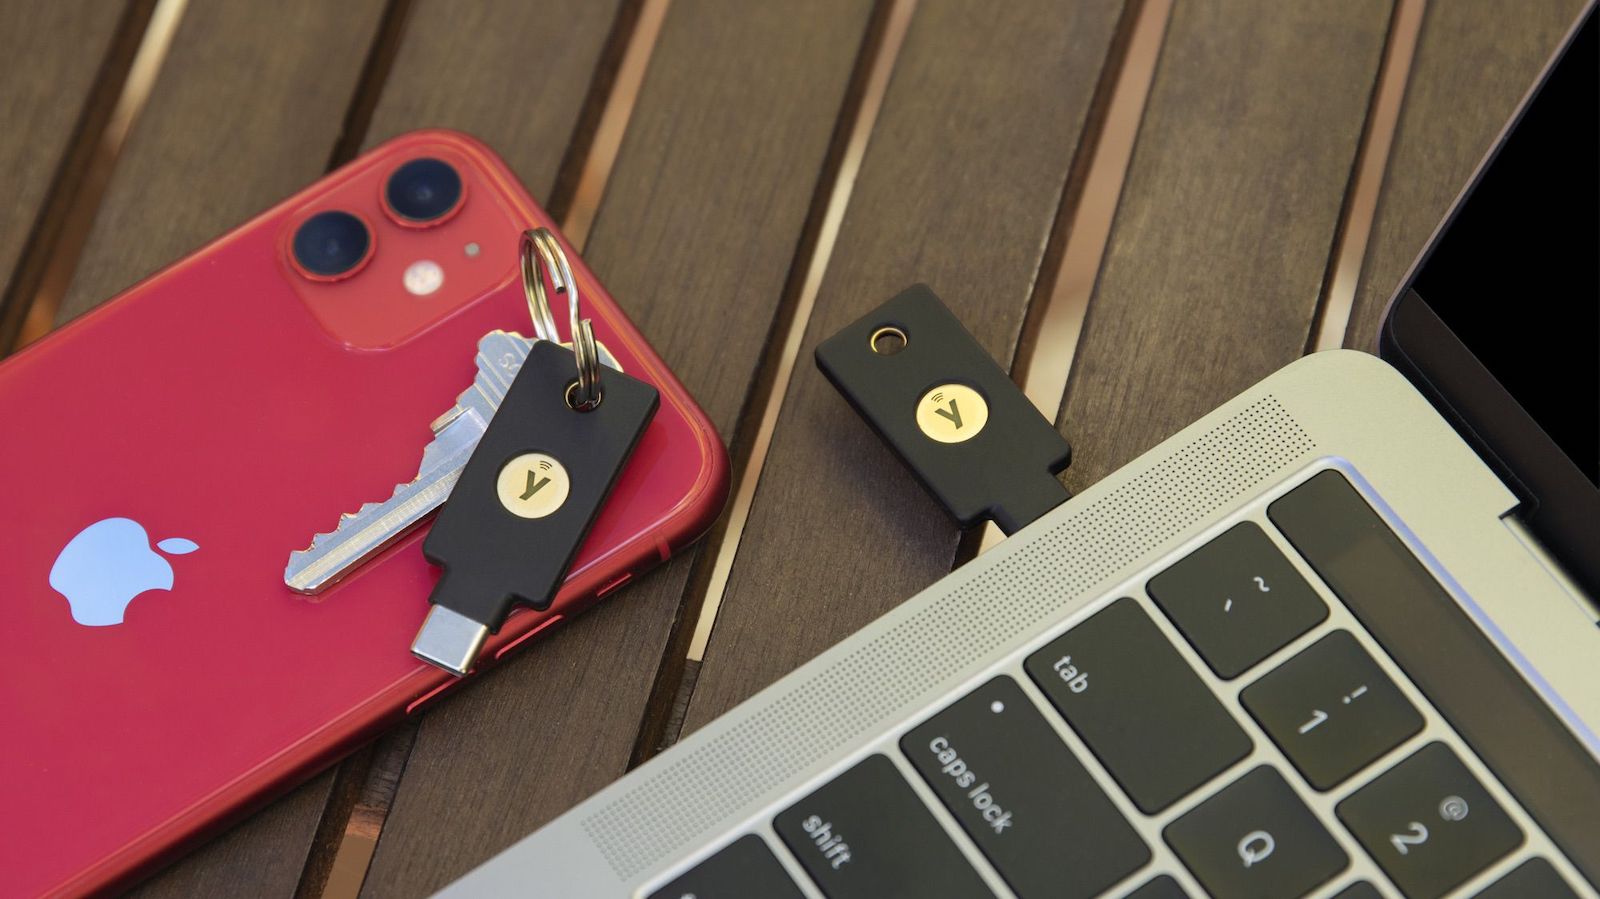 Yubico YubiKey 5C NFC multiprotocol security key protects against